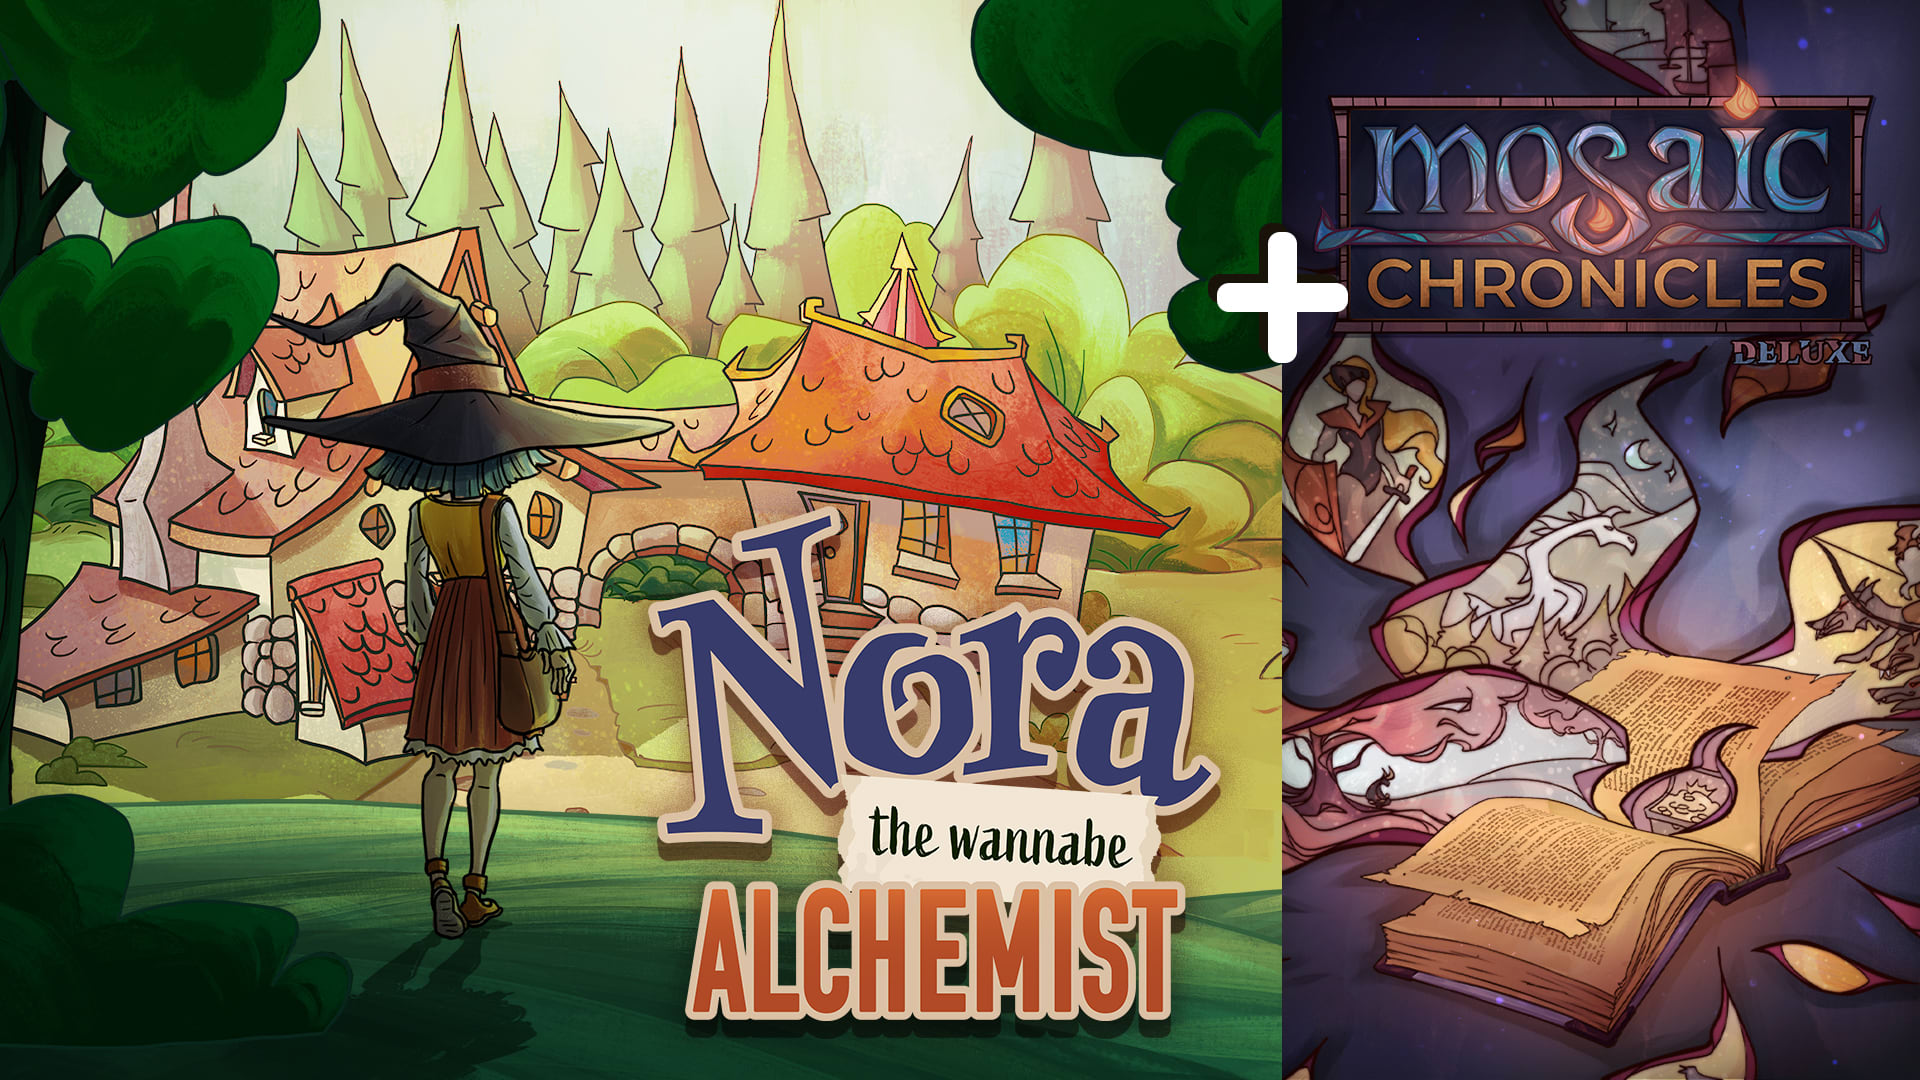 Nora: The Wannabe Alchemist + Mosaic Chronicles Deluxe 1